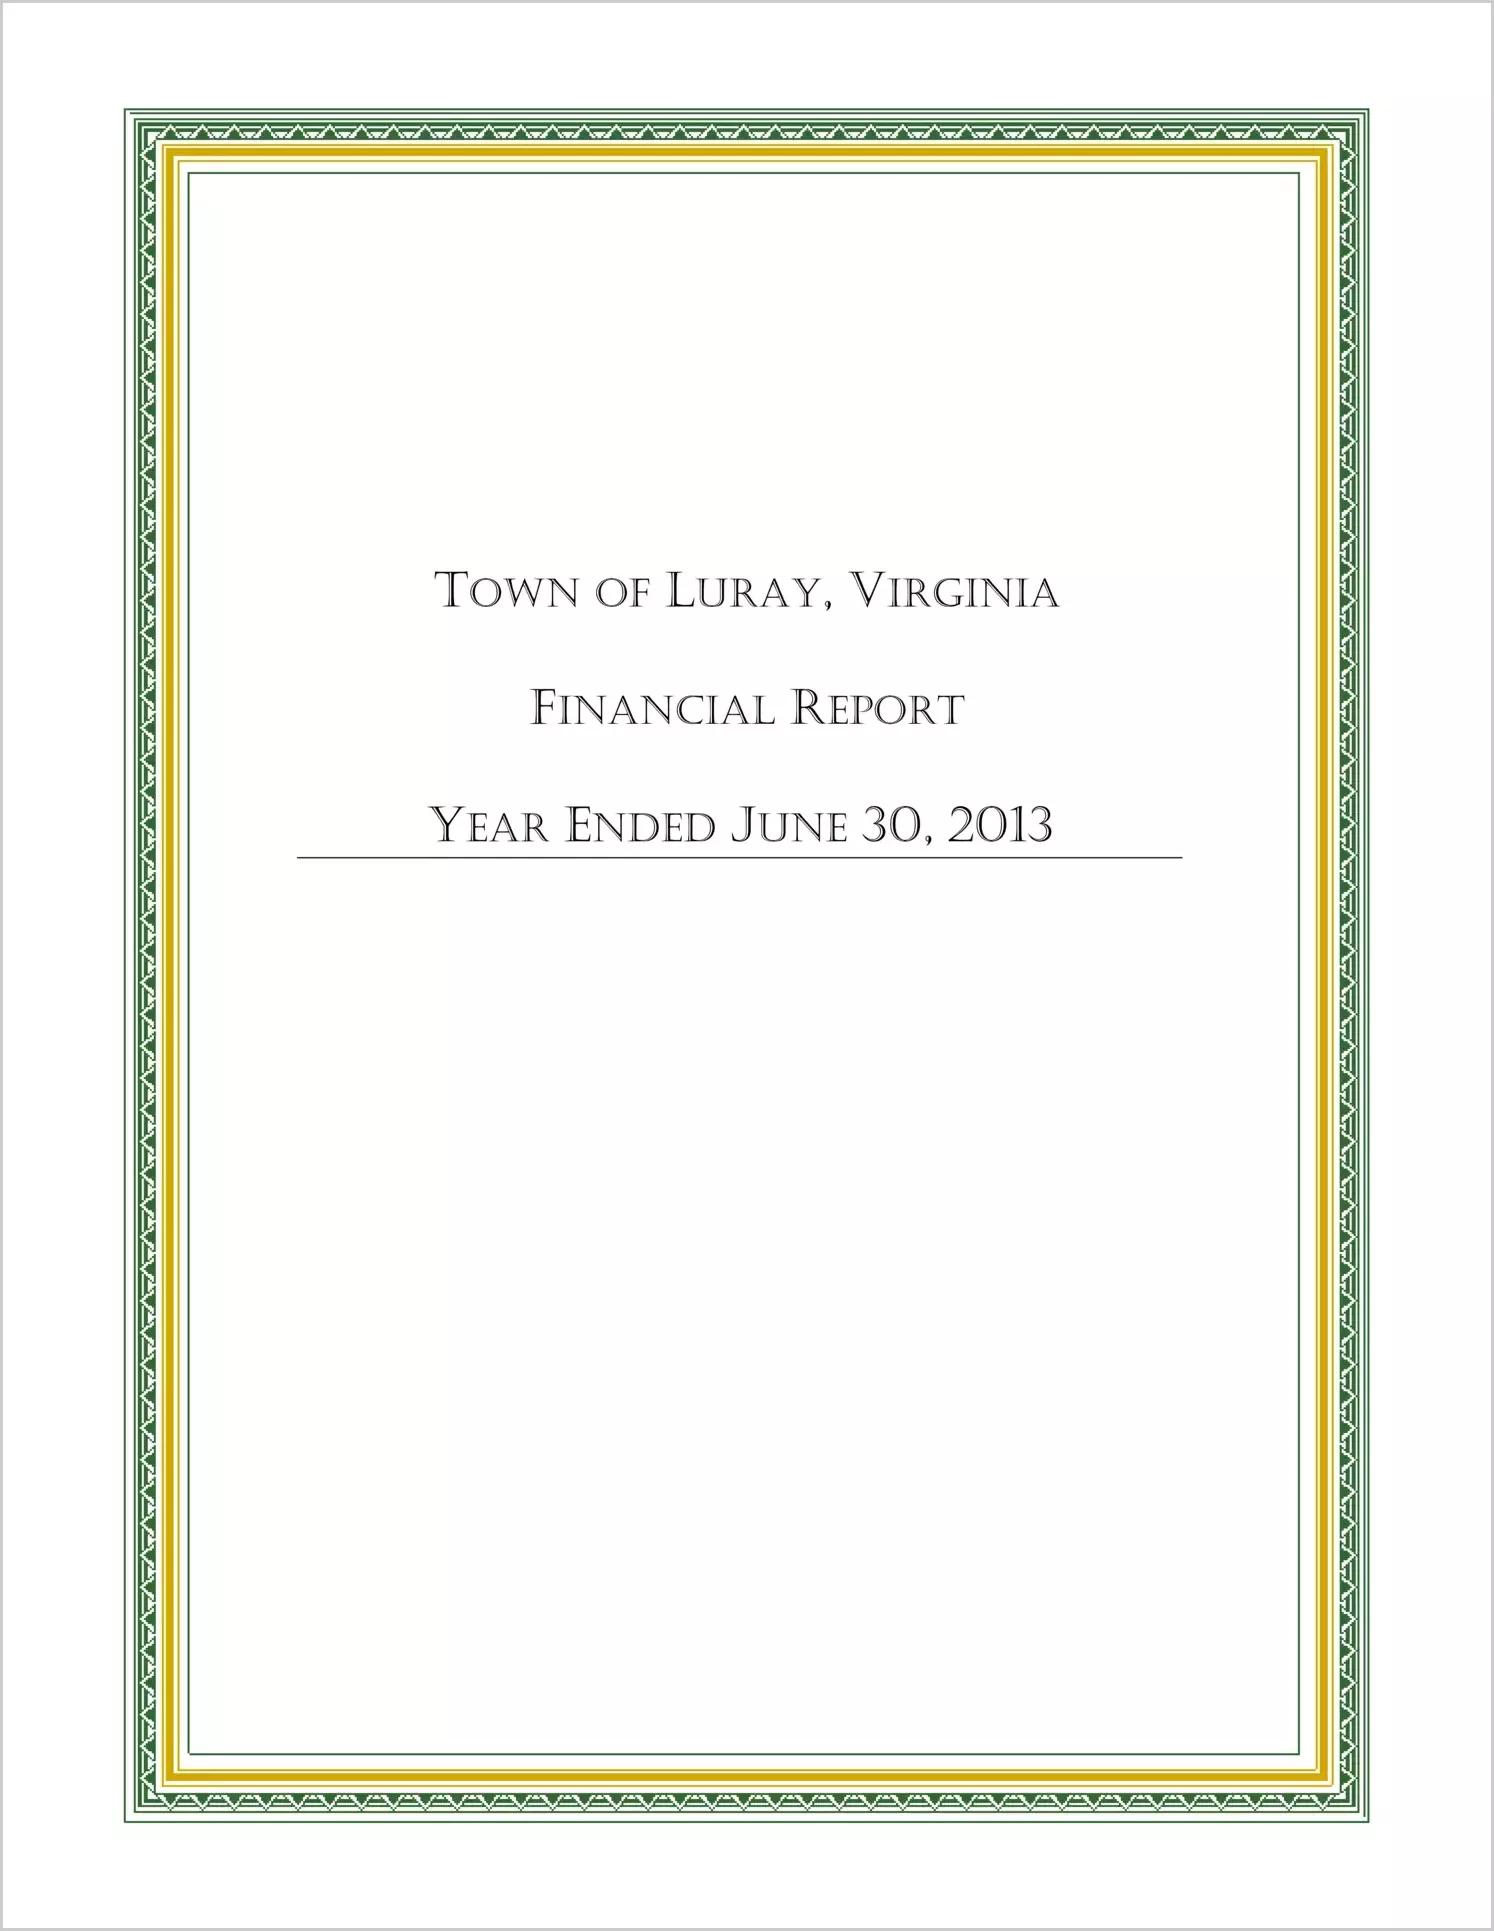 2013 Annual Financial Report for Town of Luray